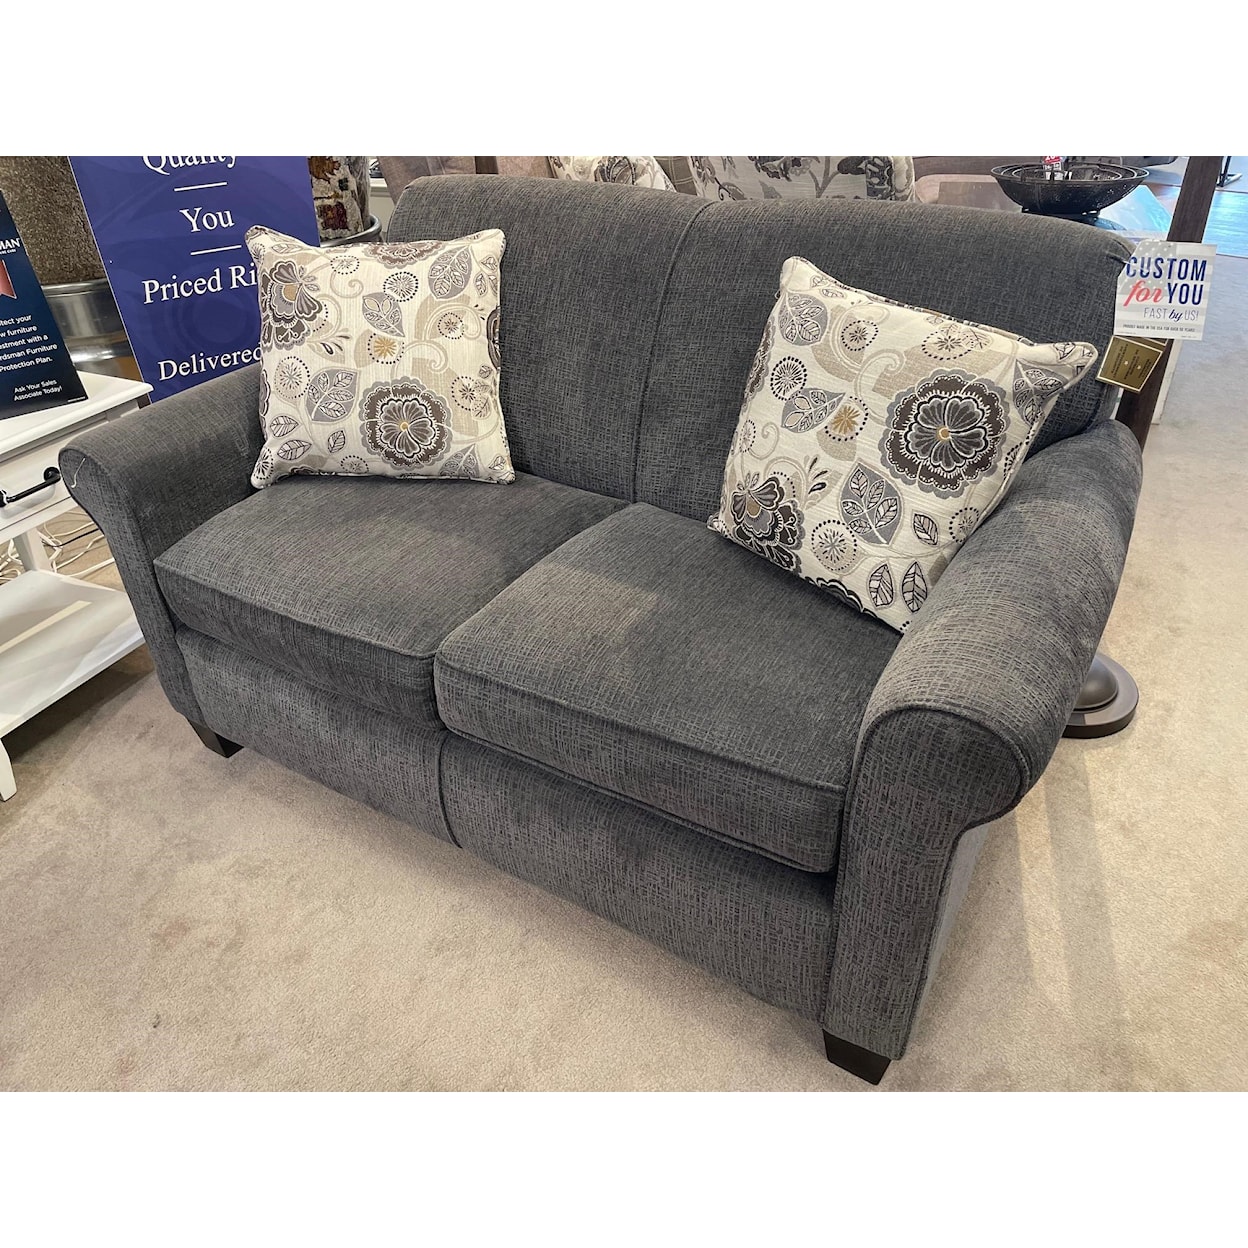 England Angie 4630 Rolled Arm Loveseat